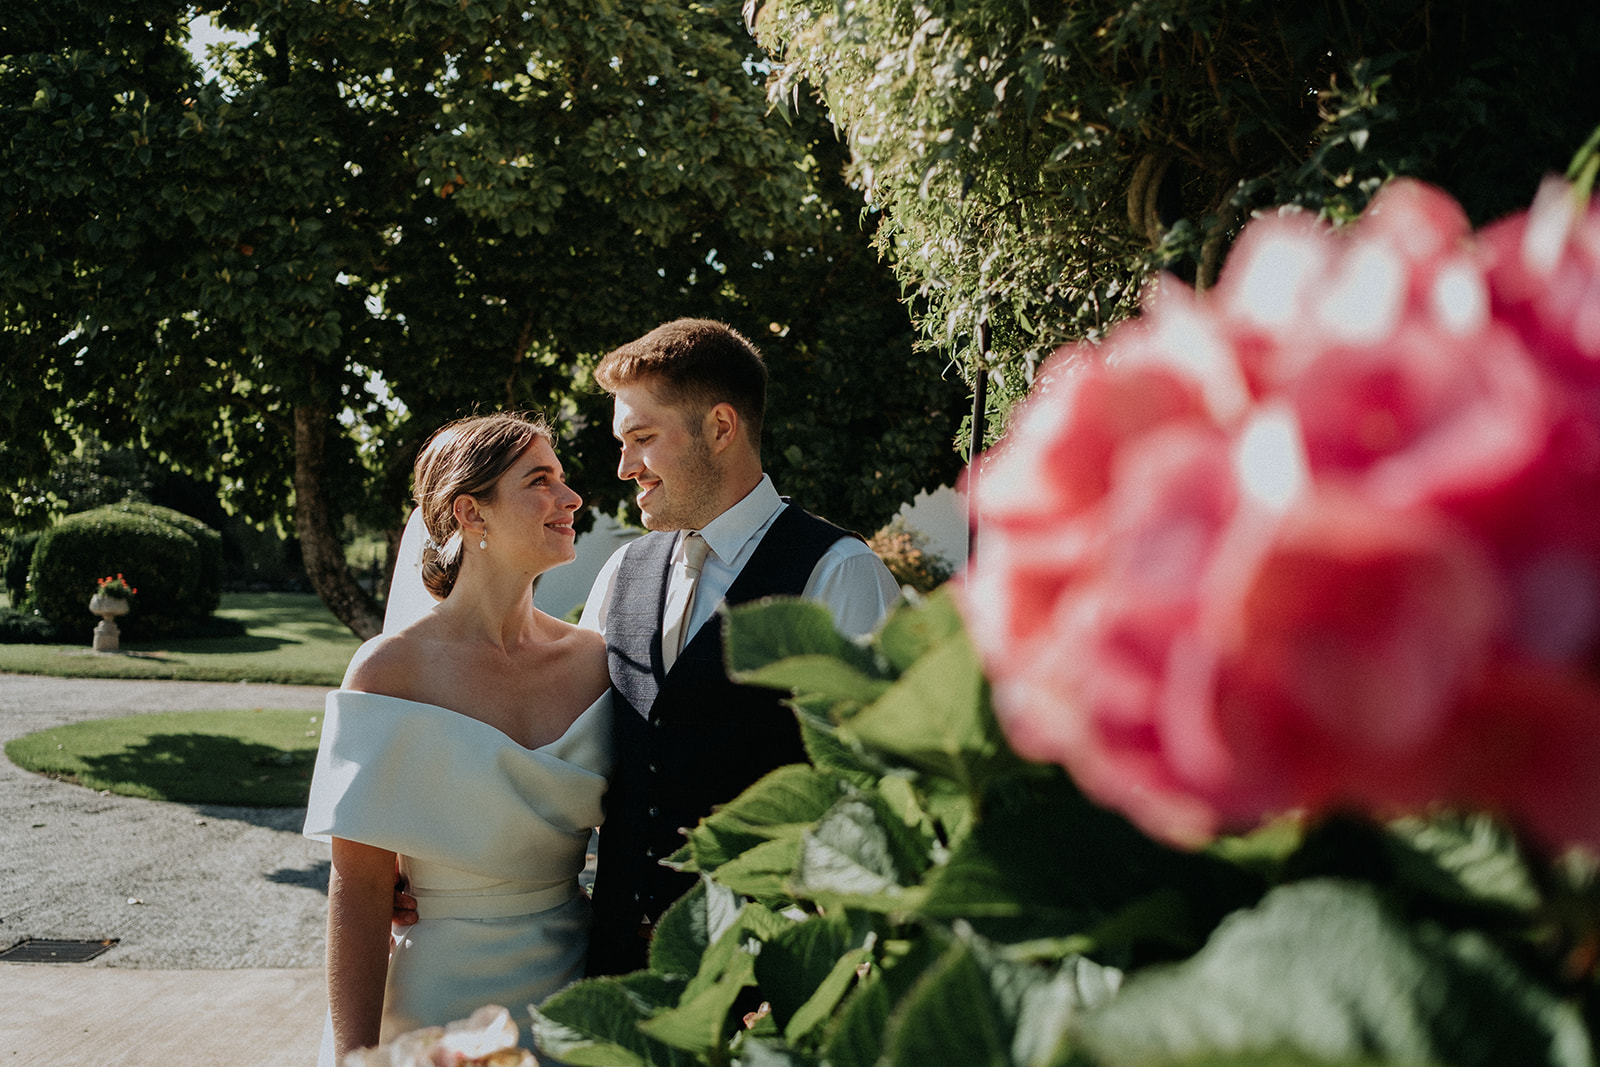 Love blossoming between Bride and Groom at Upton Barn walled garden image captured by Somerset Wedding Photographer